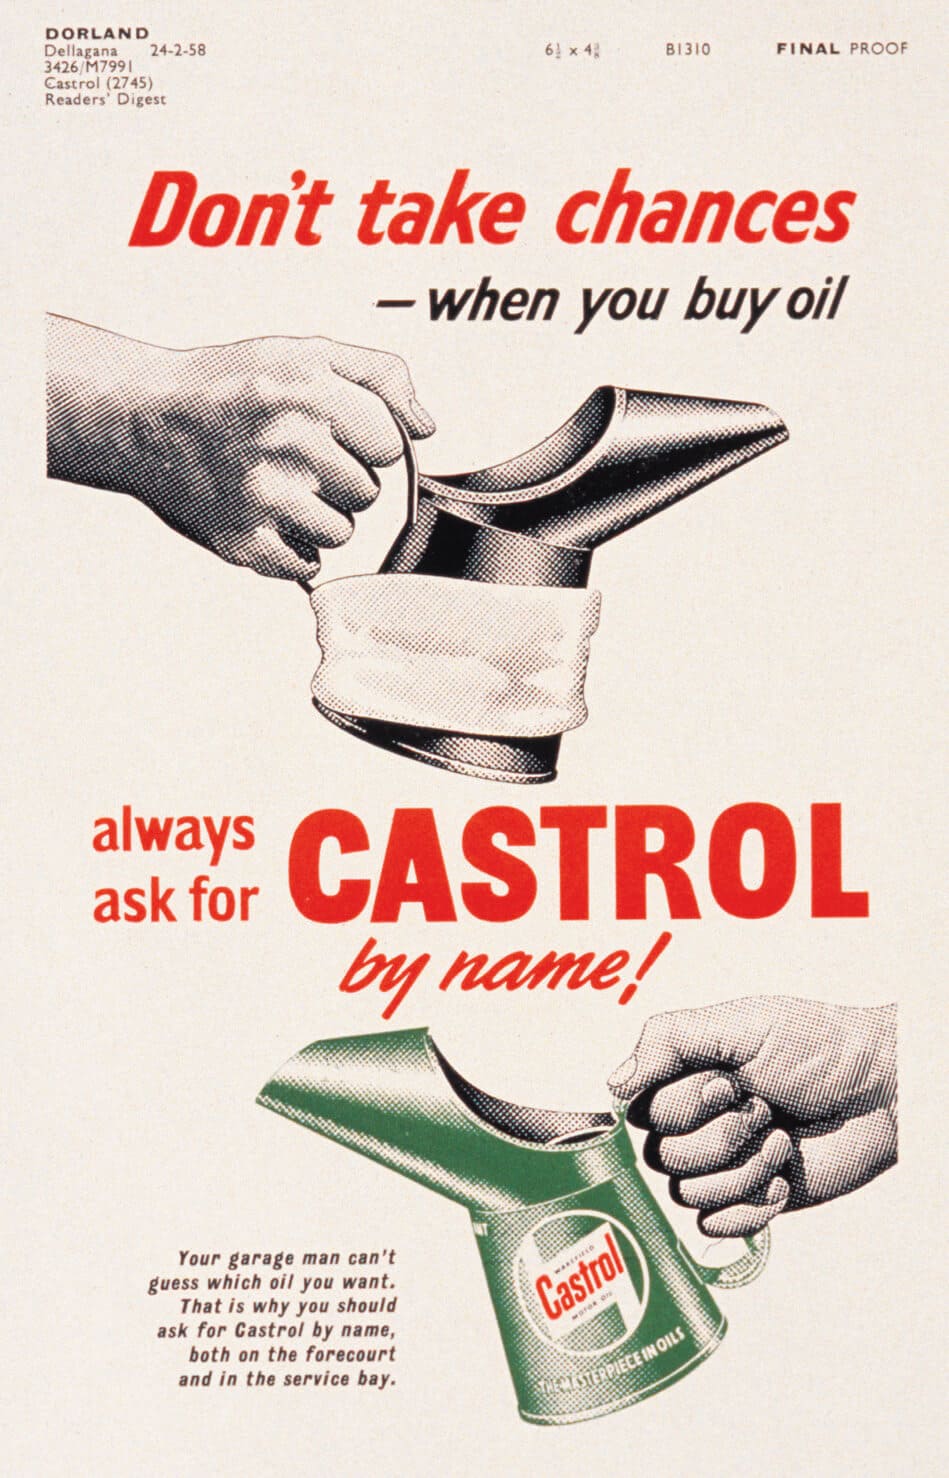 castrol_classic_always_ask_for_castrol_by_name_advert_contact_us_page